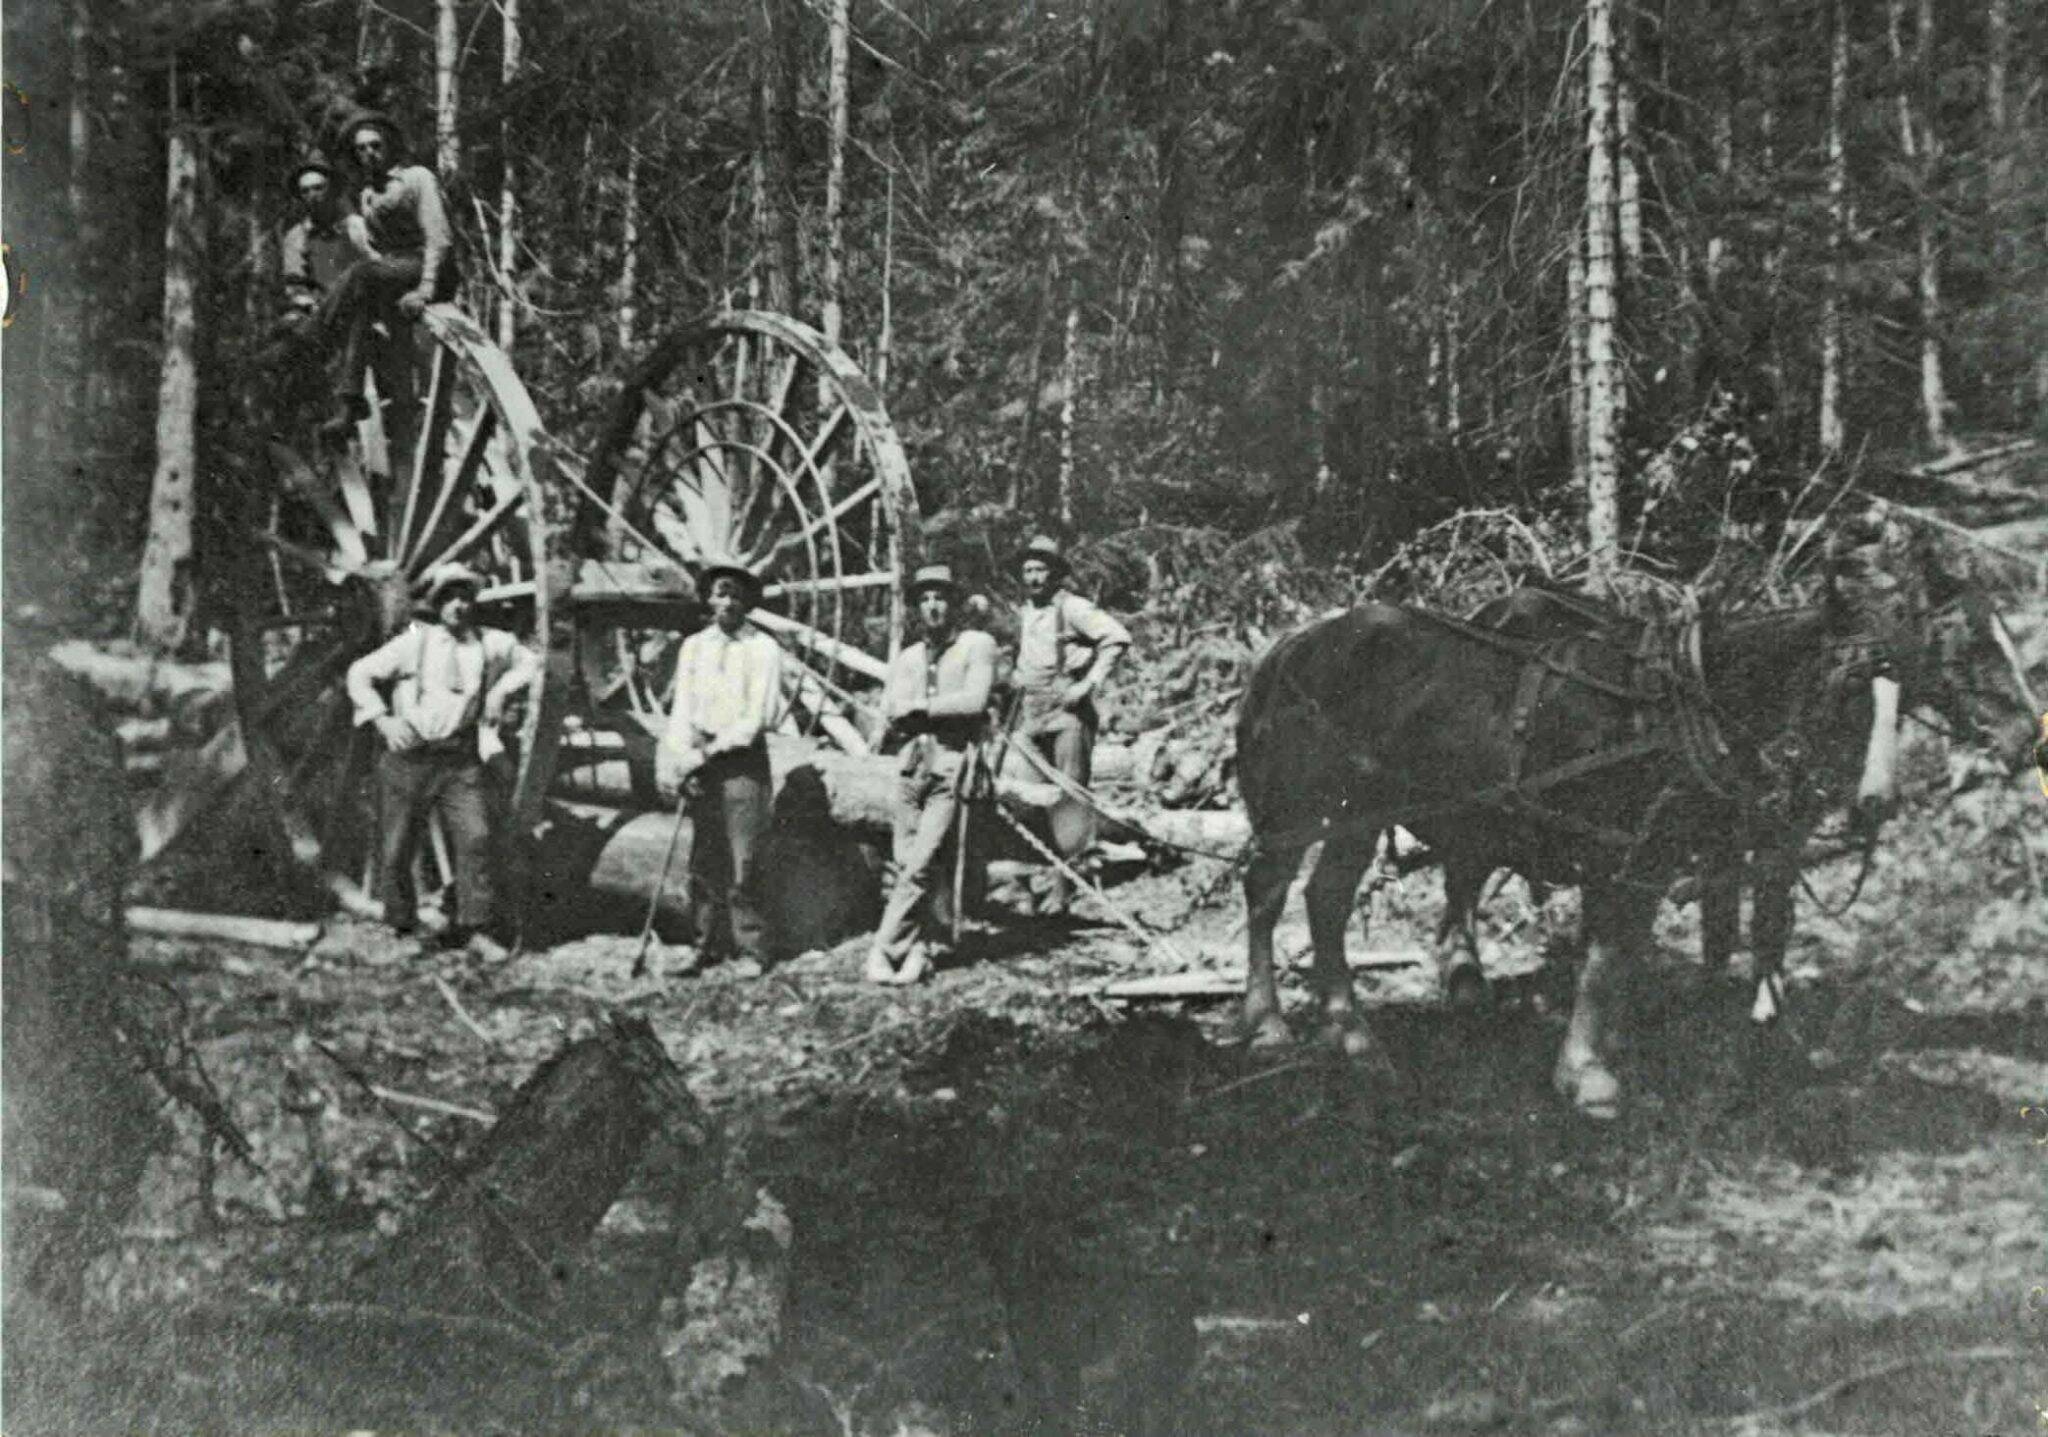 The wheels were pulled through the forest by horses. (Creston Museum)